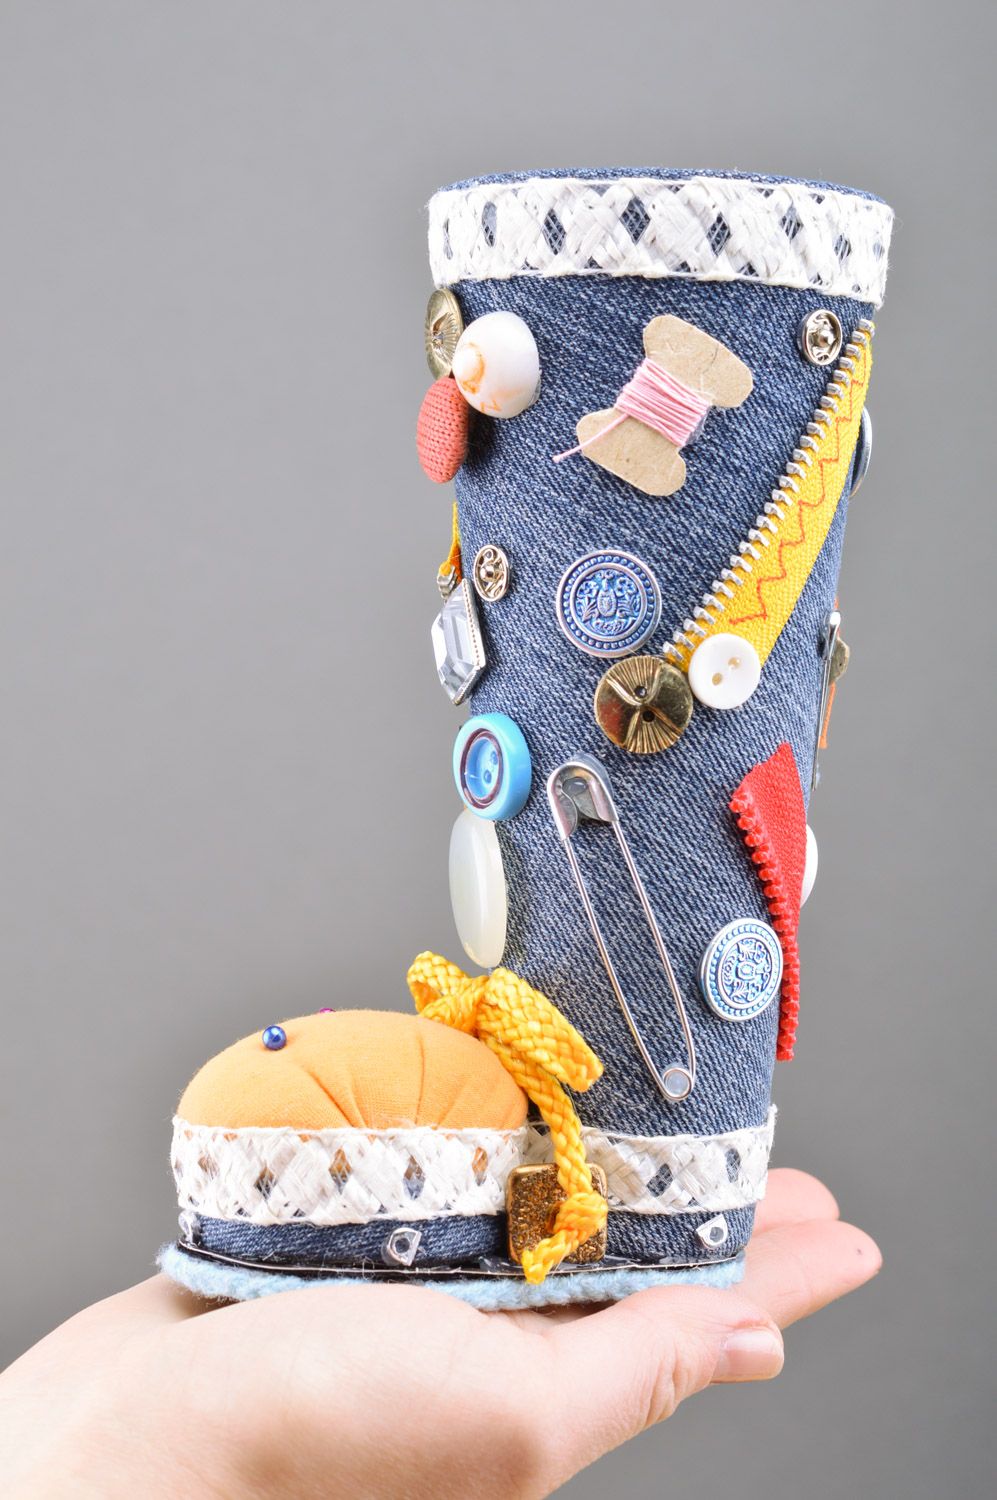 Handmade decorative denim organizer for sewing supplies and pincushion in one photo 3